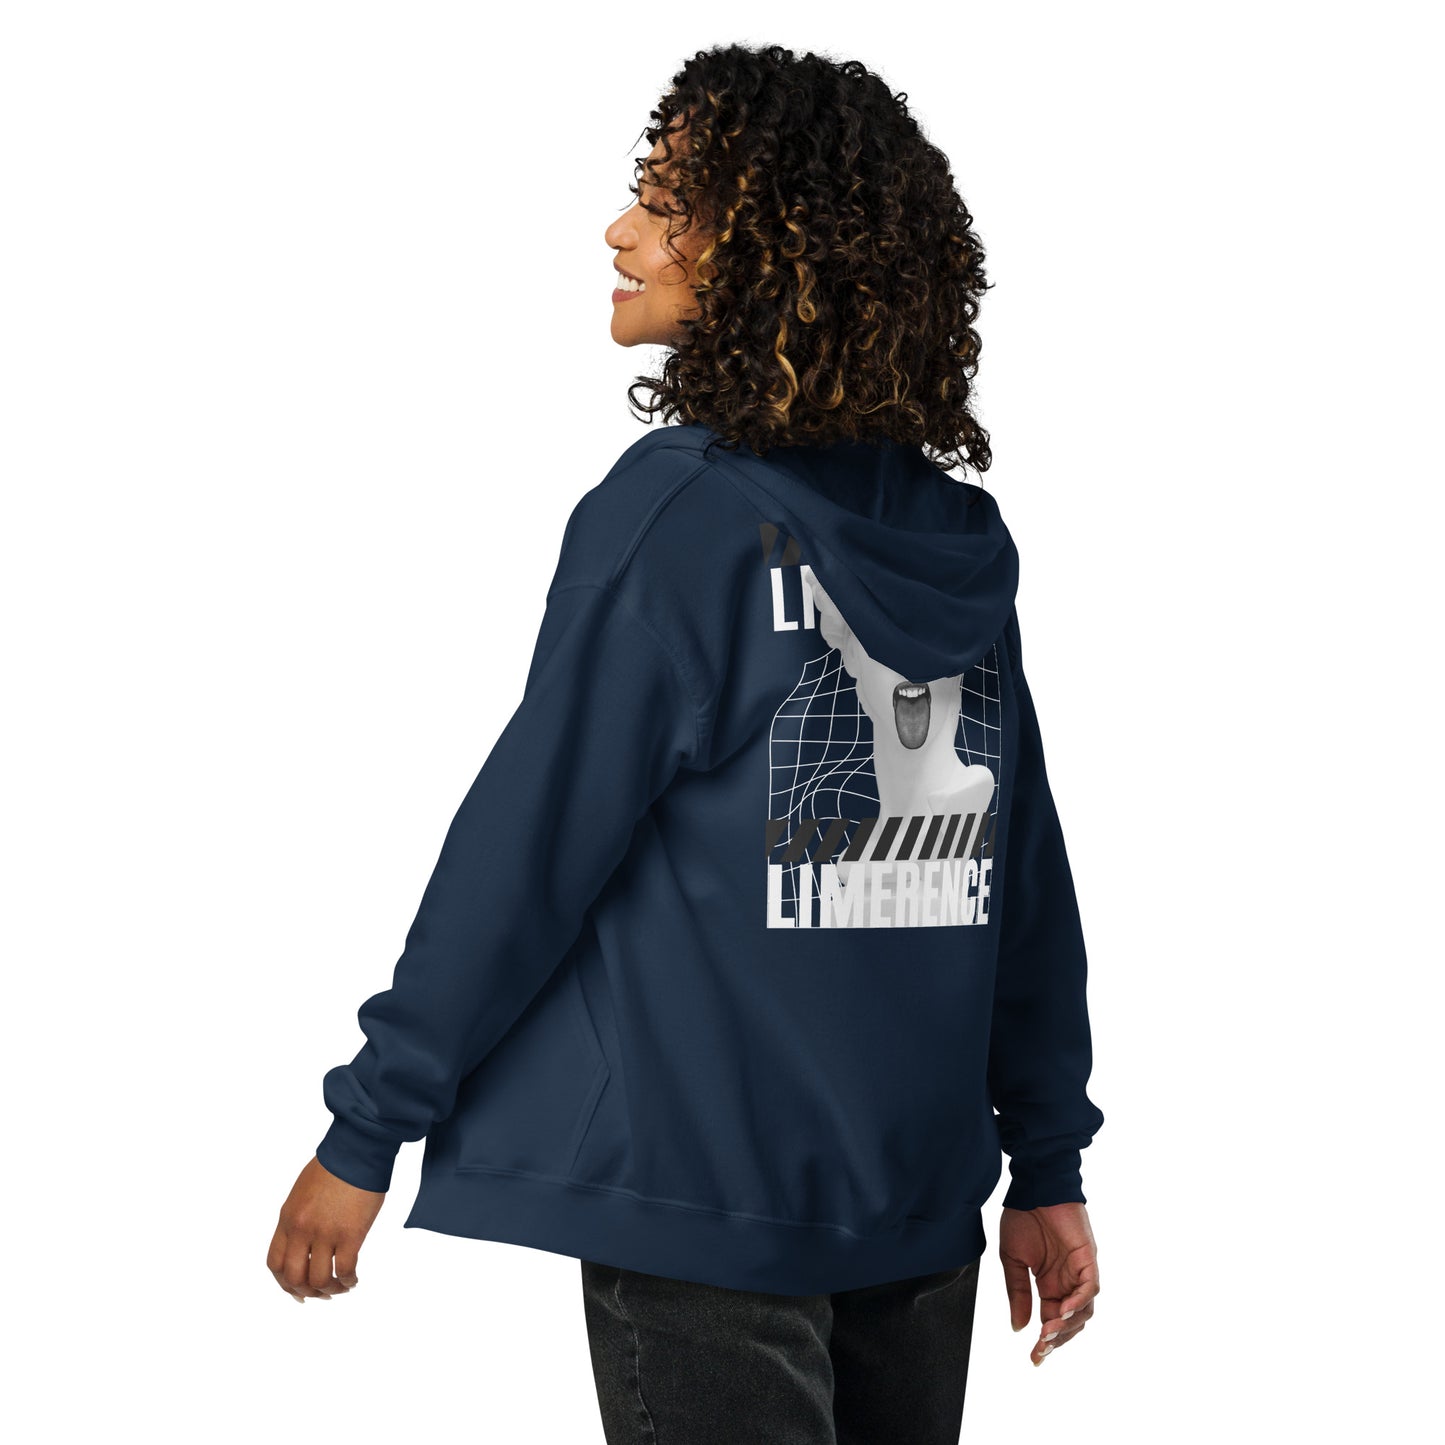 Limerence Heavy Harmony Fusion Zip Hoodie - Navy